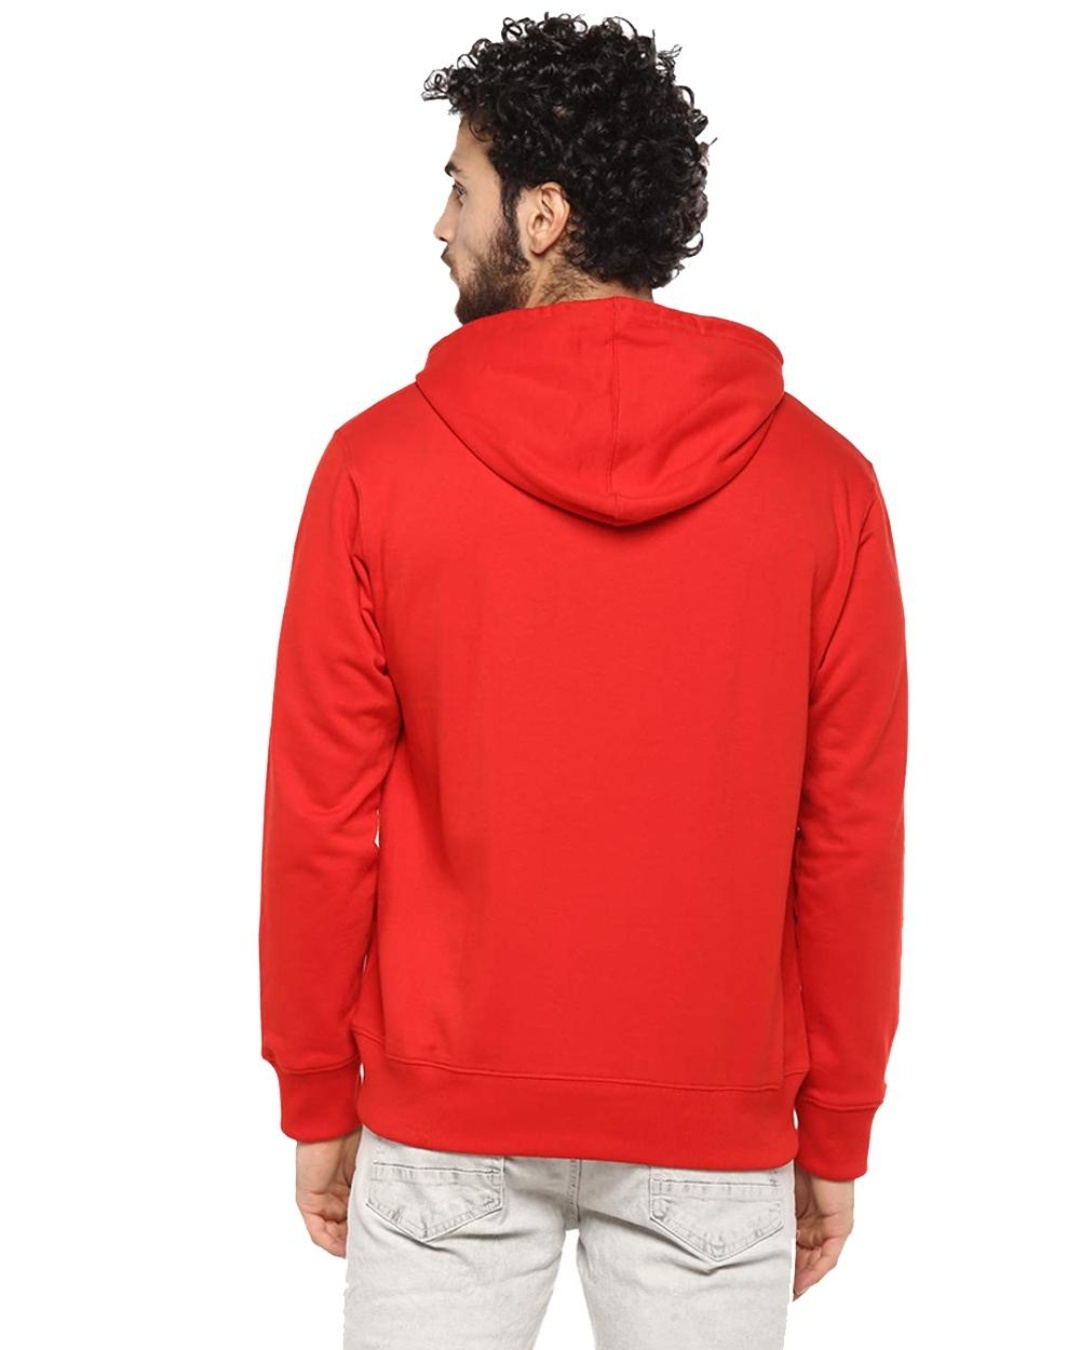 Shop Men's Red Hardest Climb Graphic Printed Hoodie-Back